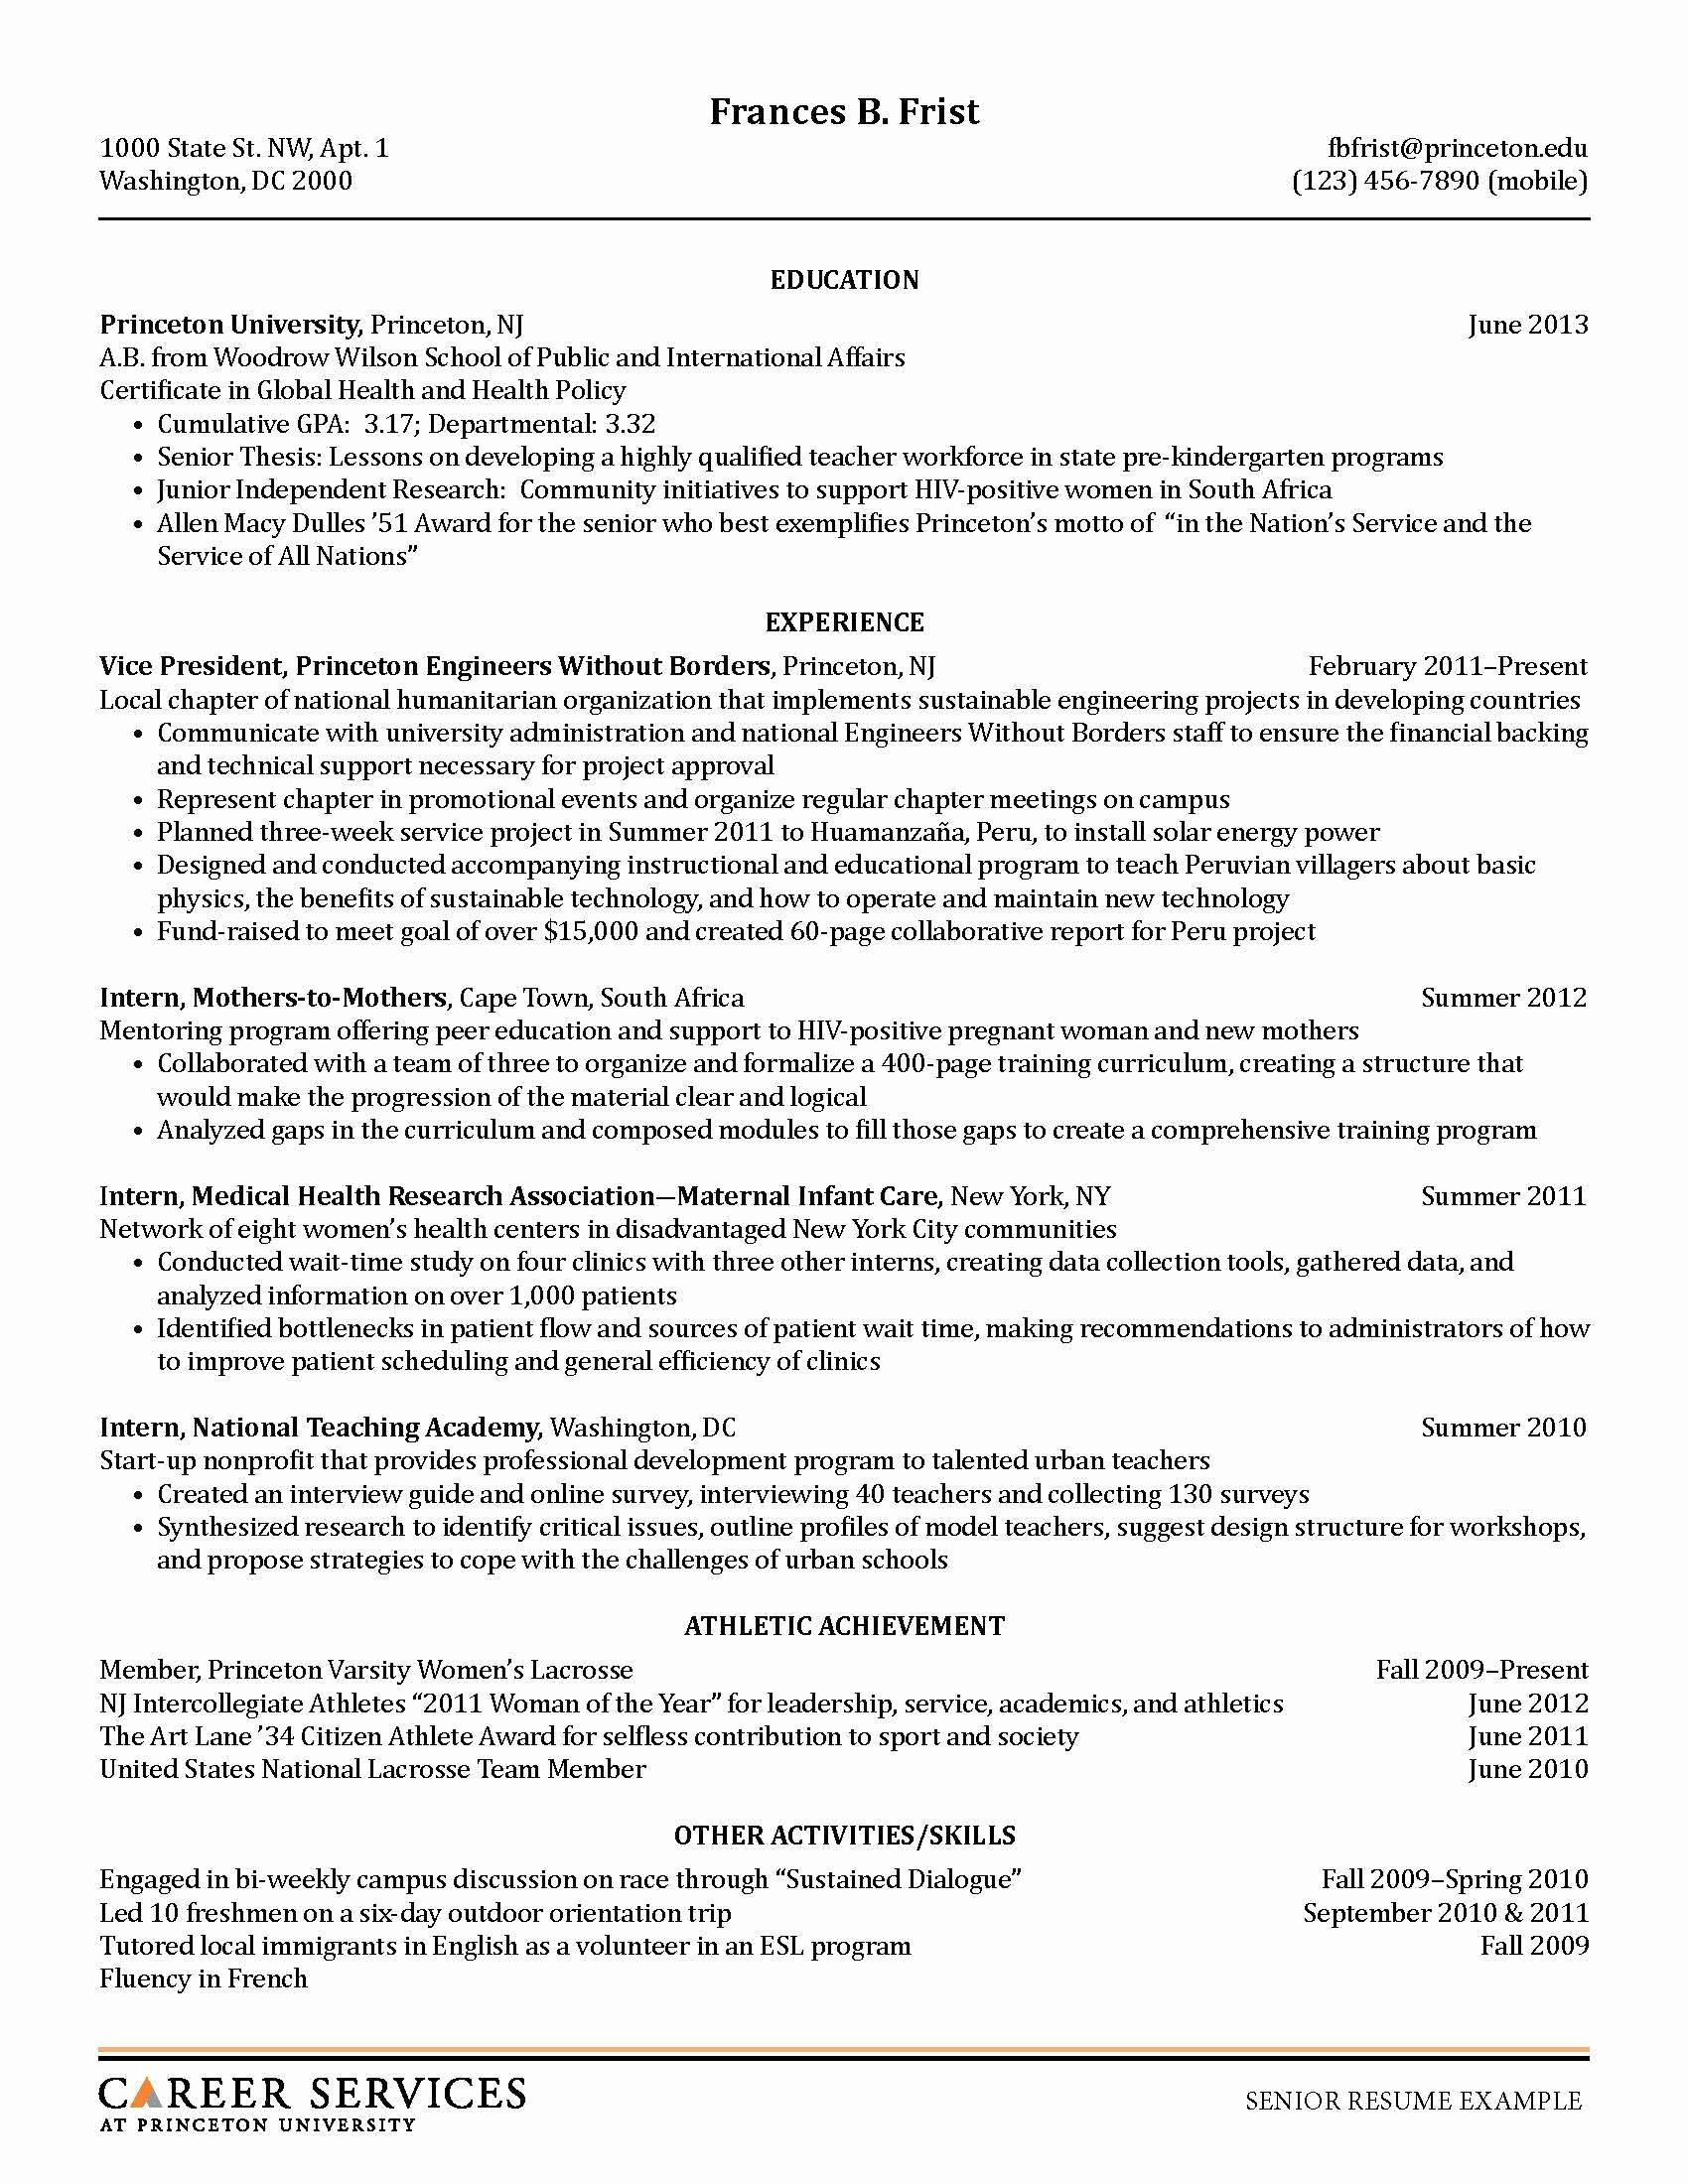 Linkedin Cover Letter Template - Linkedin Resume Search Fresh Dice Resume Search Awesome E Page